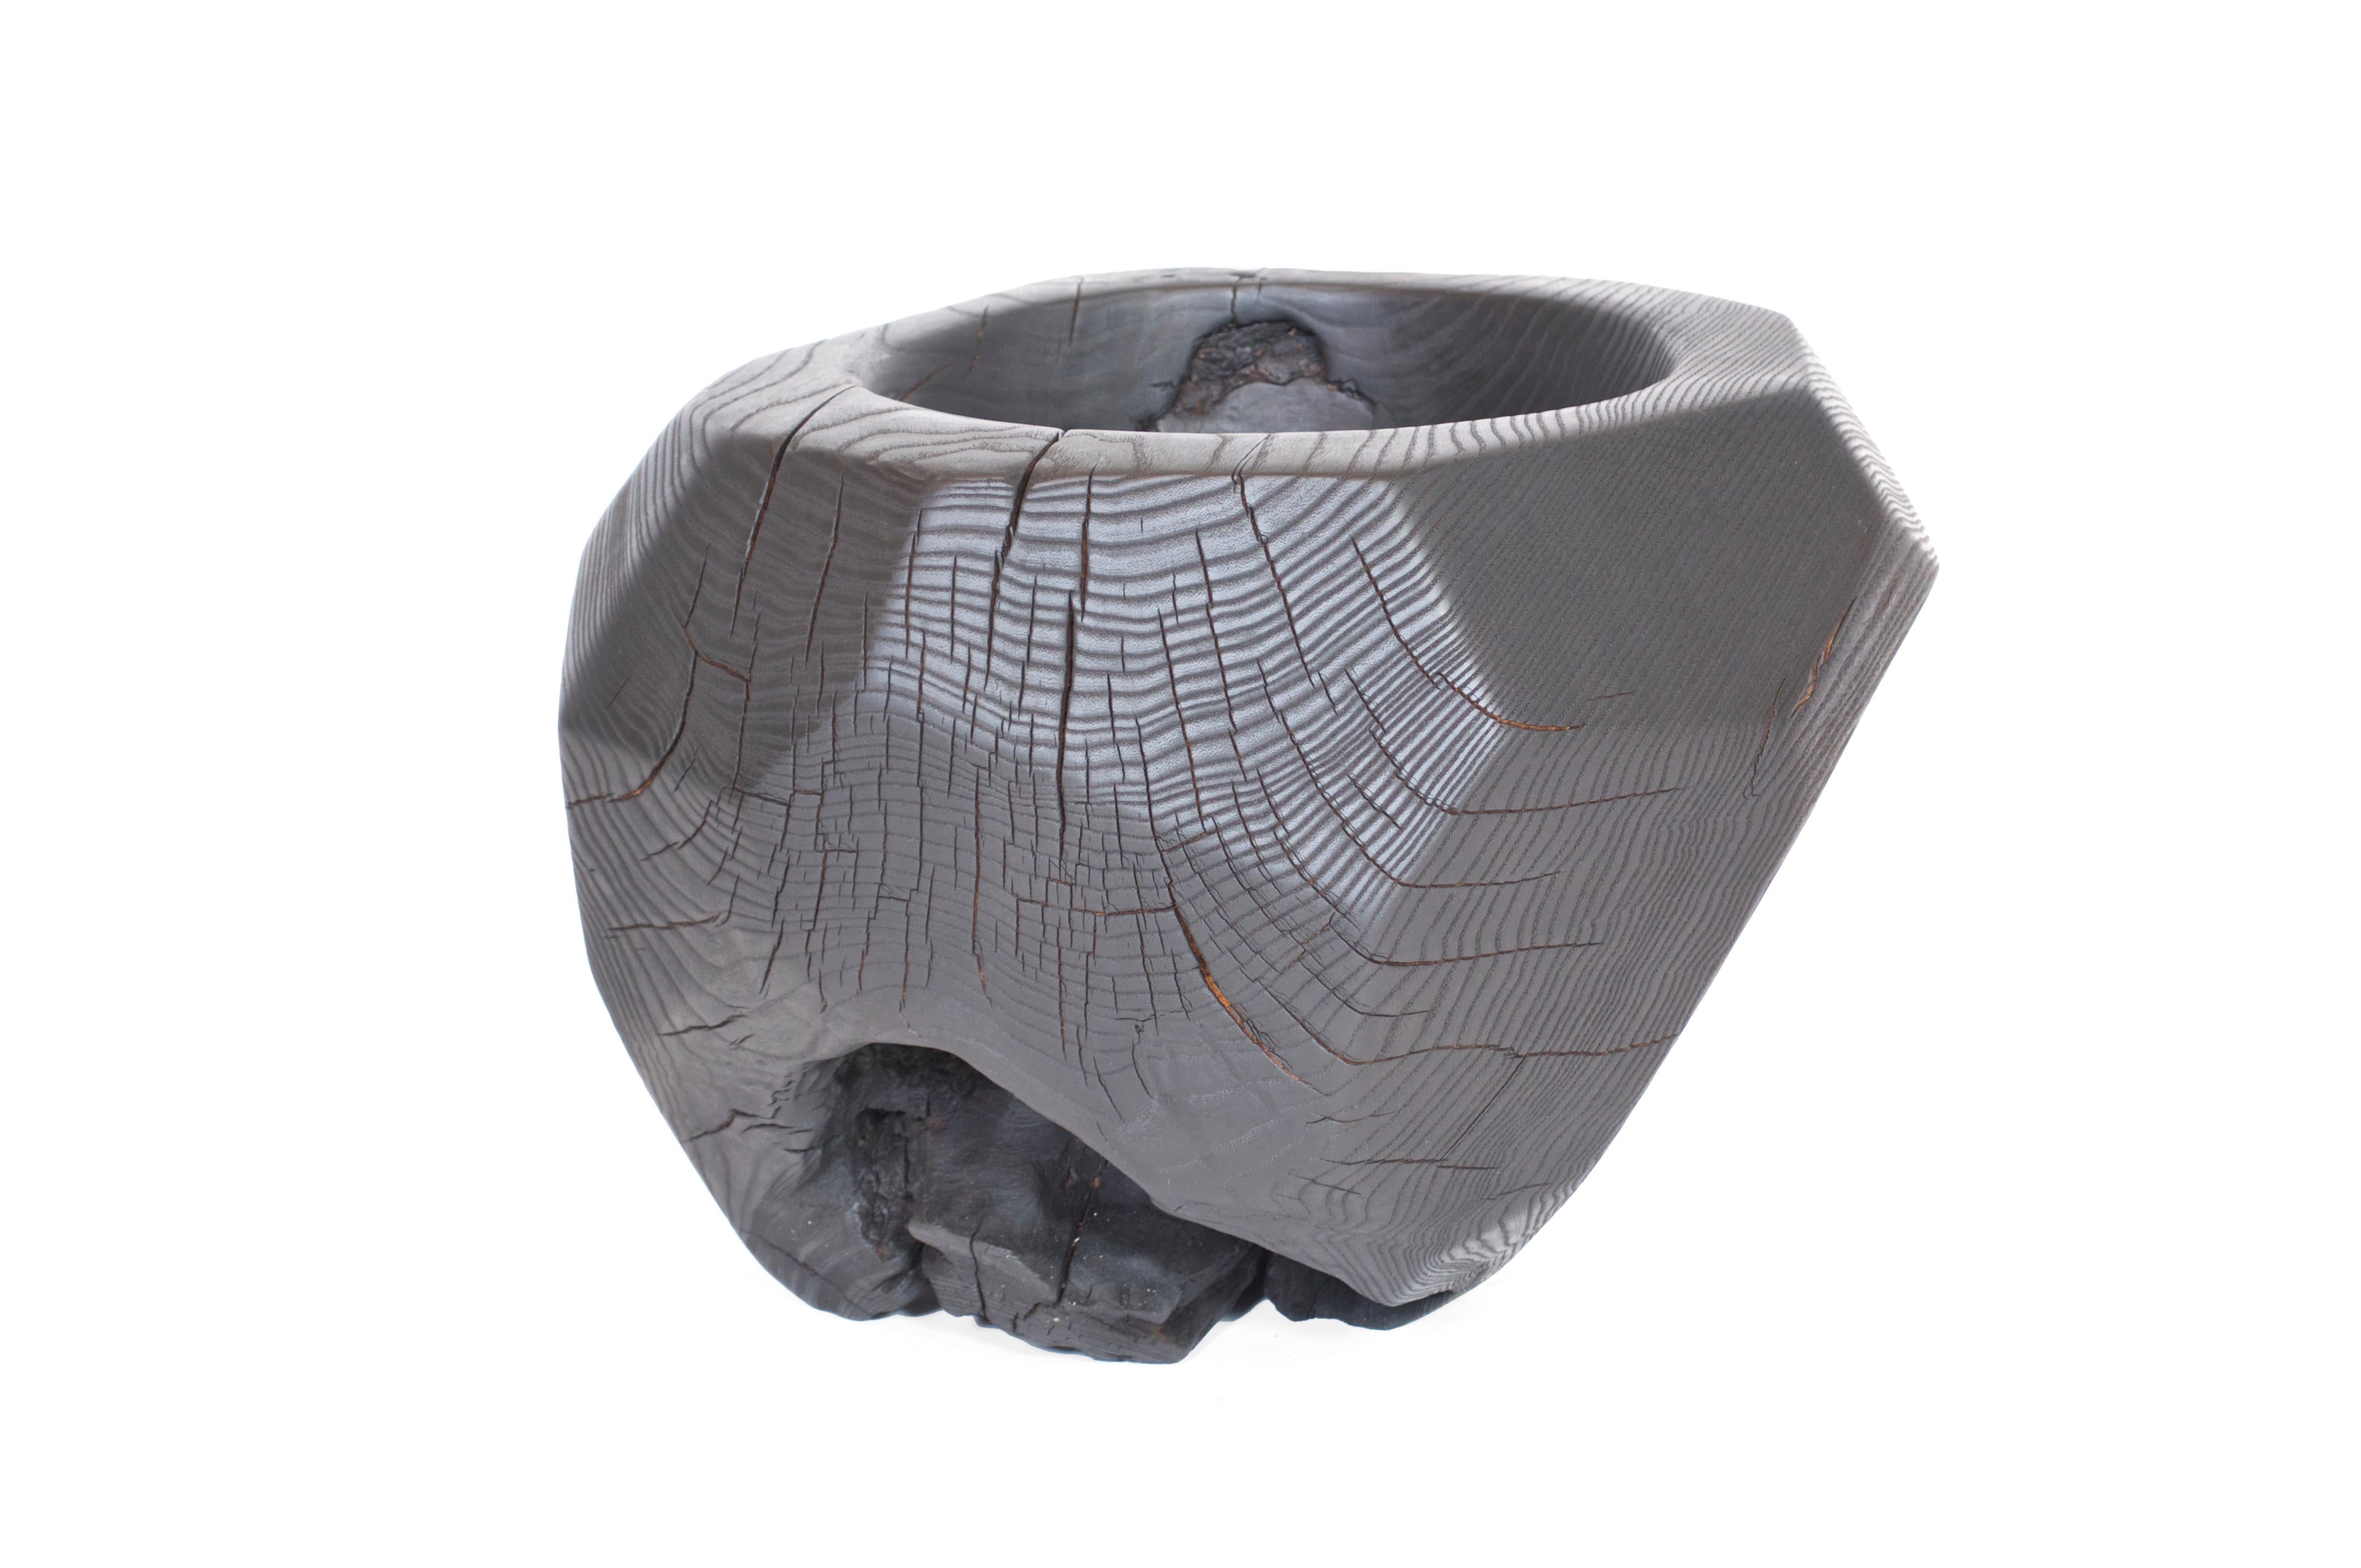 Vessel 2831 by Jörg Pietschmann
Dimensions: D 39 x W 39 x H 29 cm 
Materials: ash.
Technique: burned
Finish: polished oil finish.


In Pietschmann’s sculptures, trees that for centuries were part of a landscape and founded in primordial forces tell